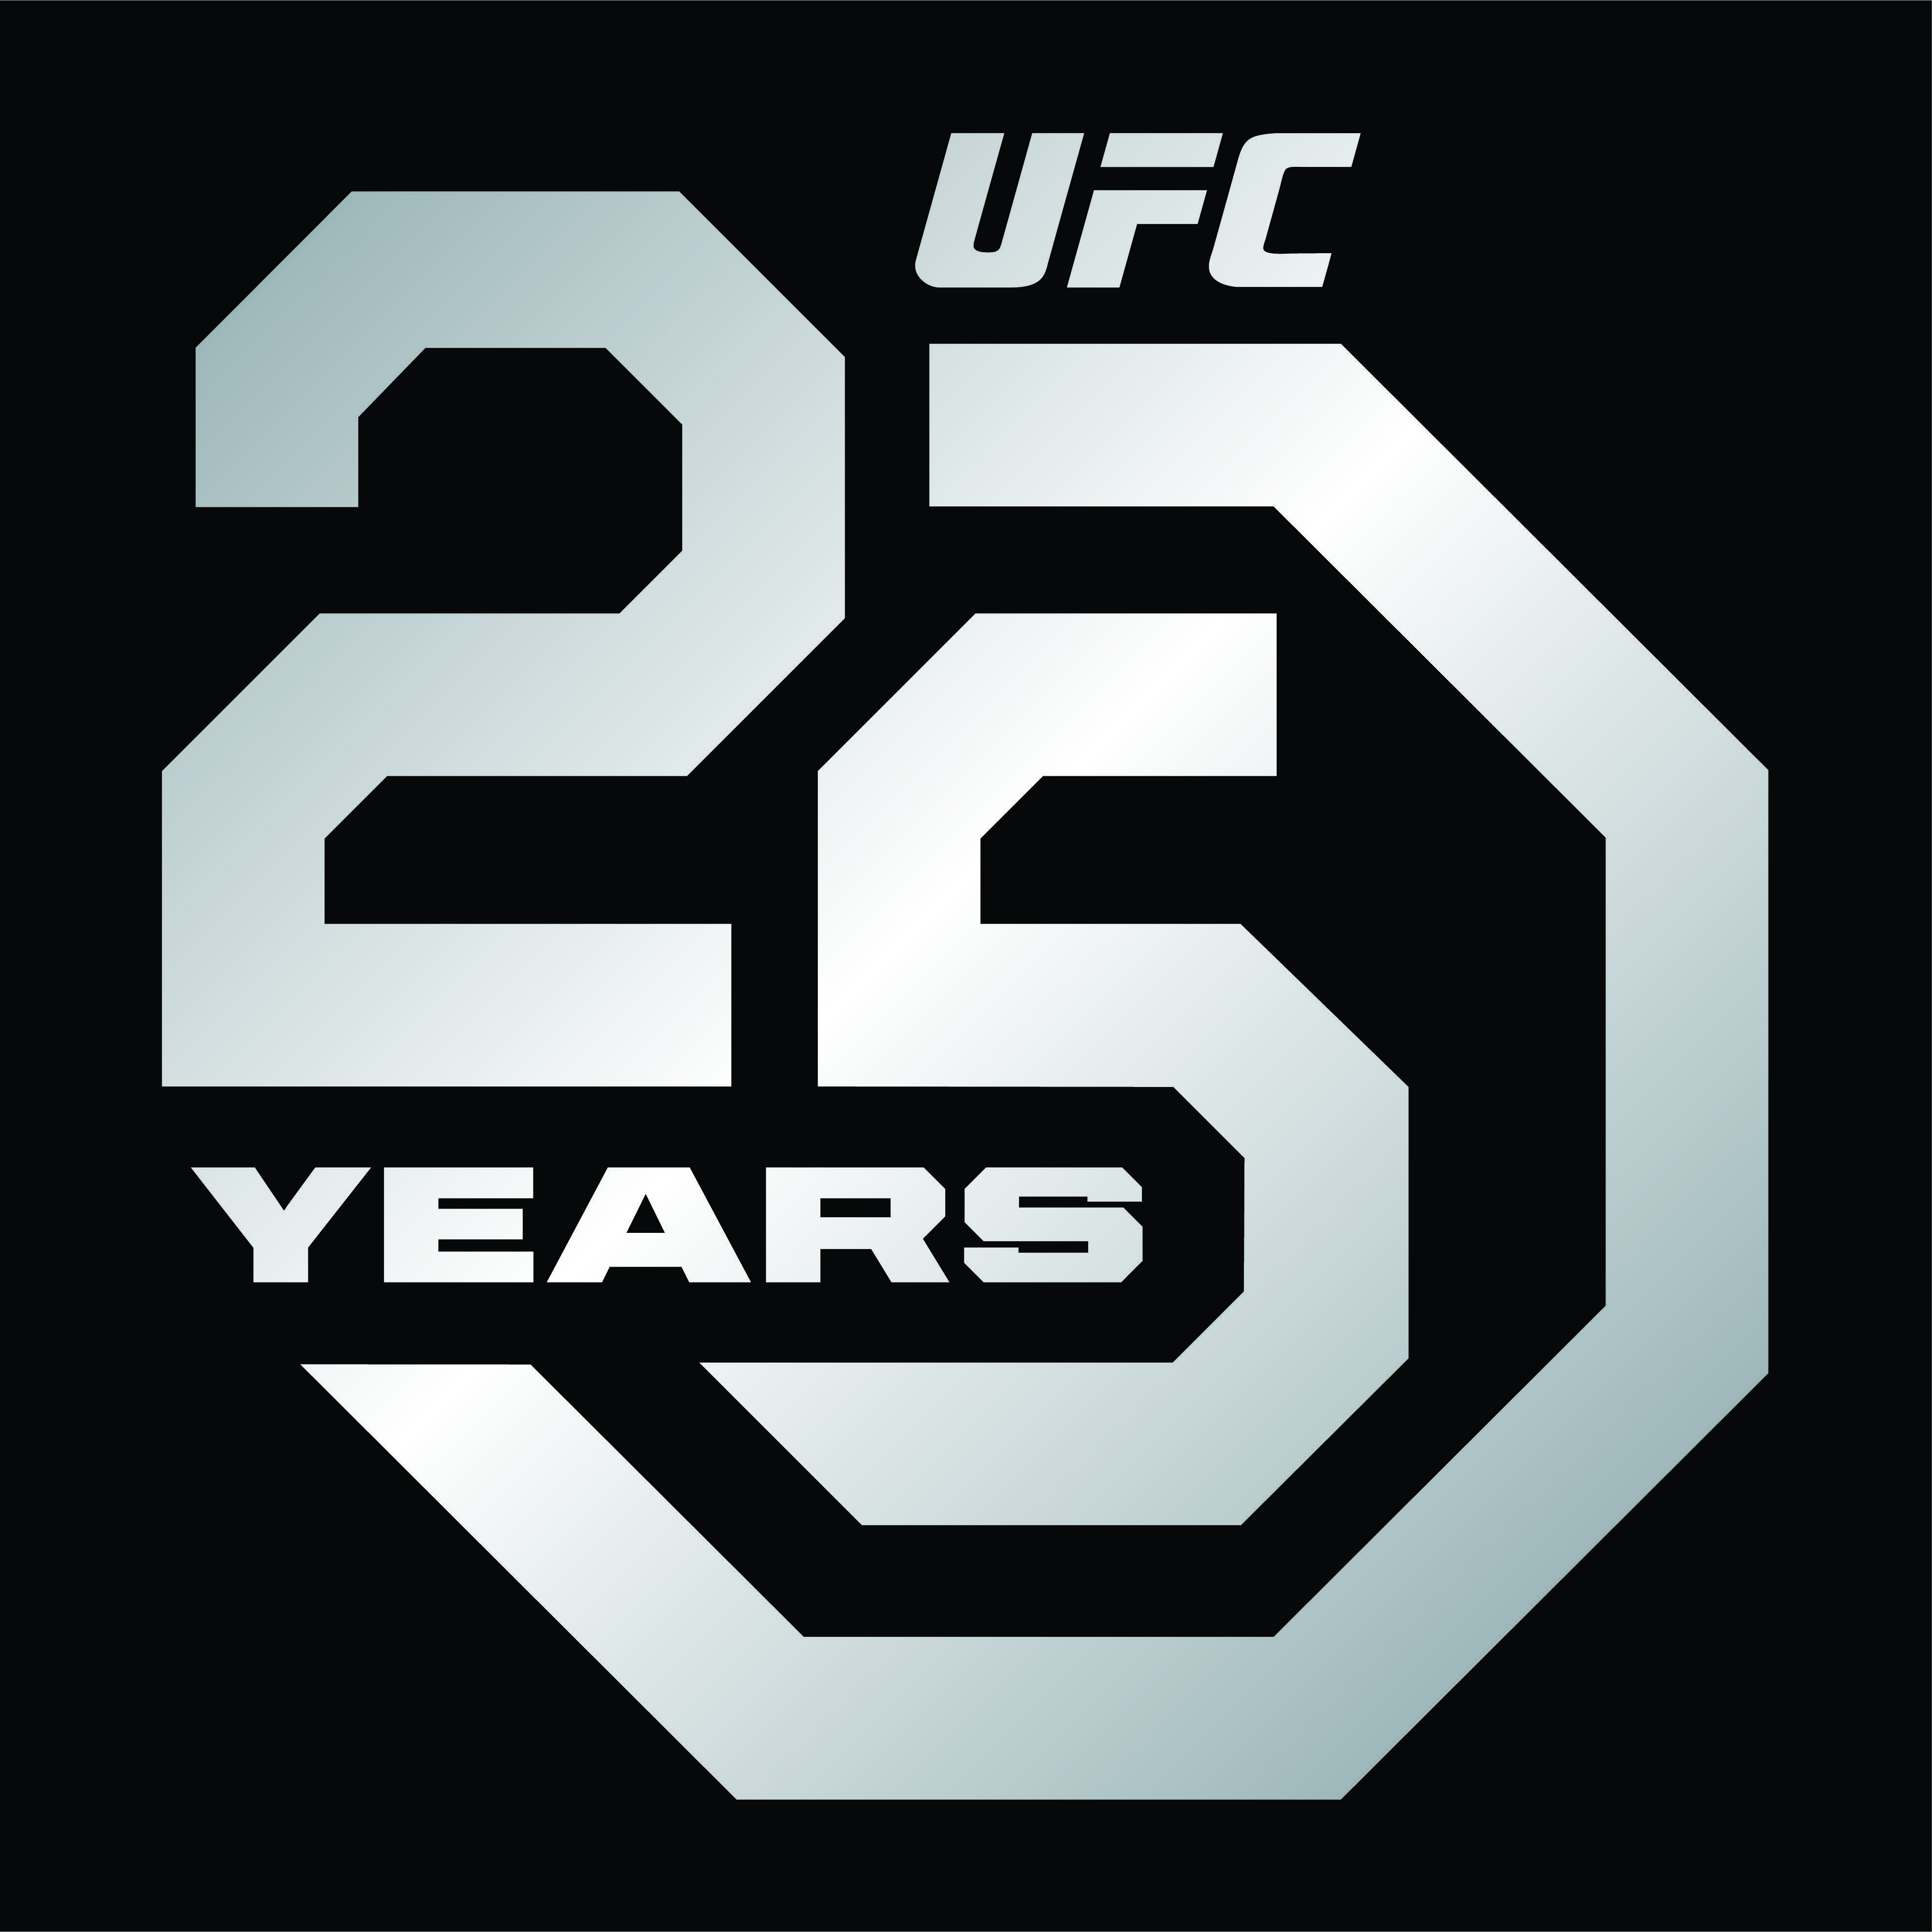 Year 2018 Logo - UFC unveils 25-year anniversary logo for 2018 campaign - MMAmania.com